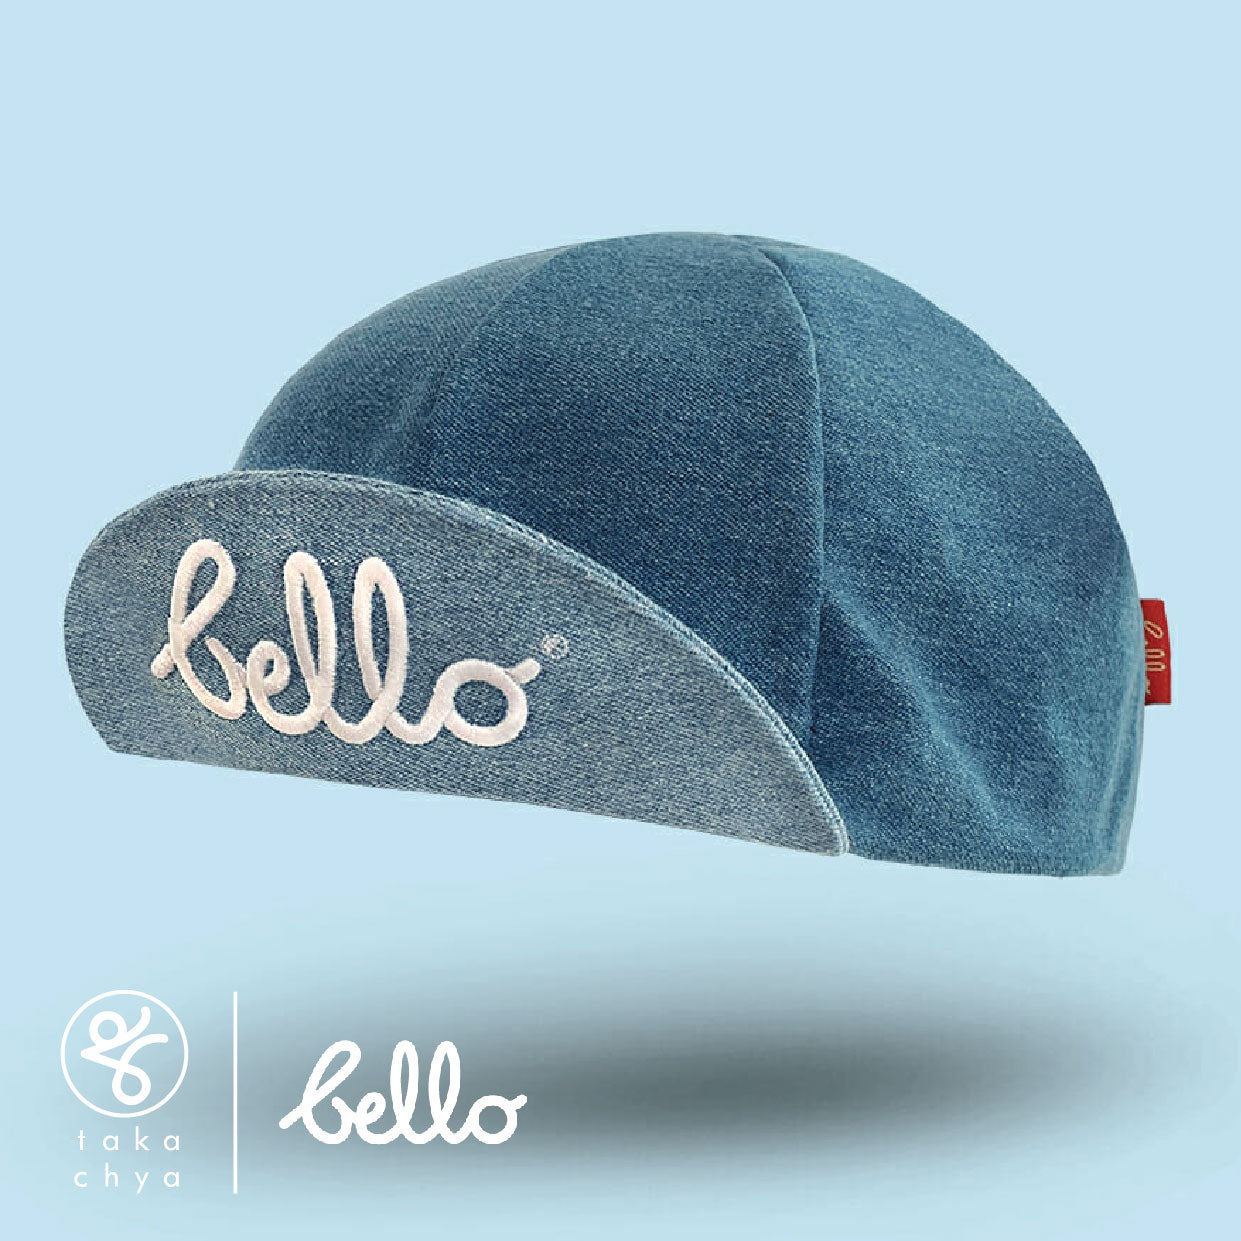 Jeany - Bello Cyclist Designer Collaboration Cycling Cap